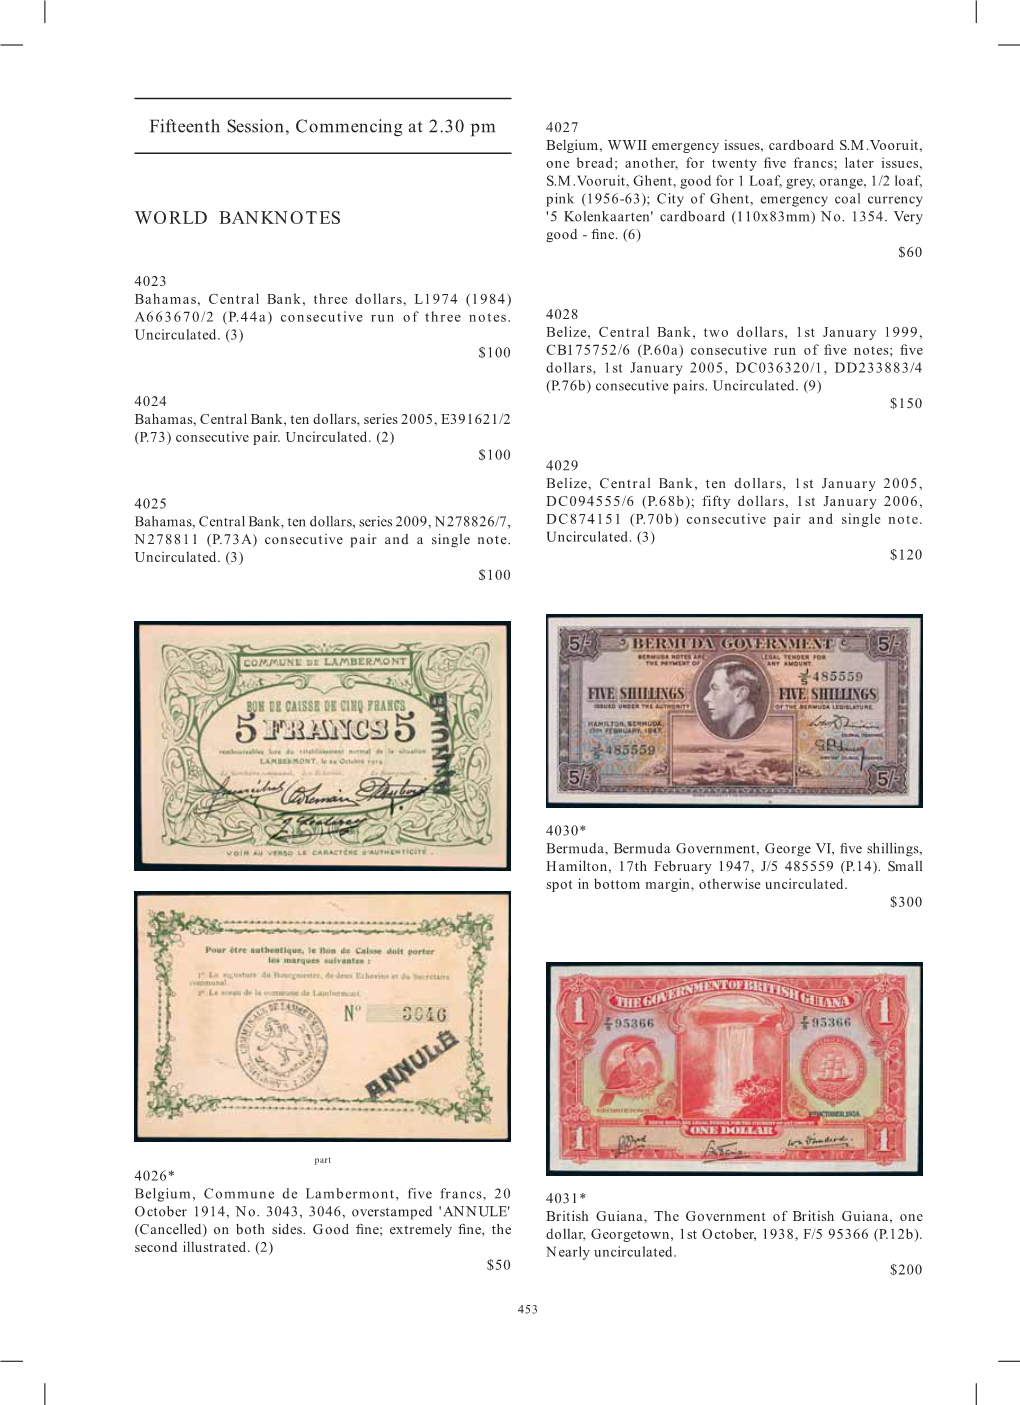 Fifteenth Session, Commencing at 2.30 Pm WORLD BANKNOTES